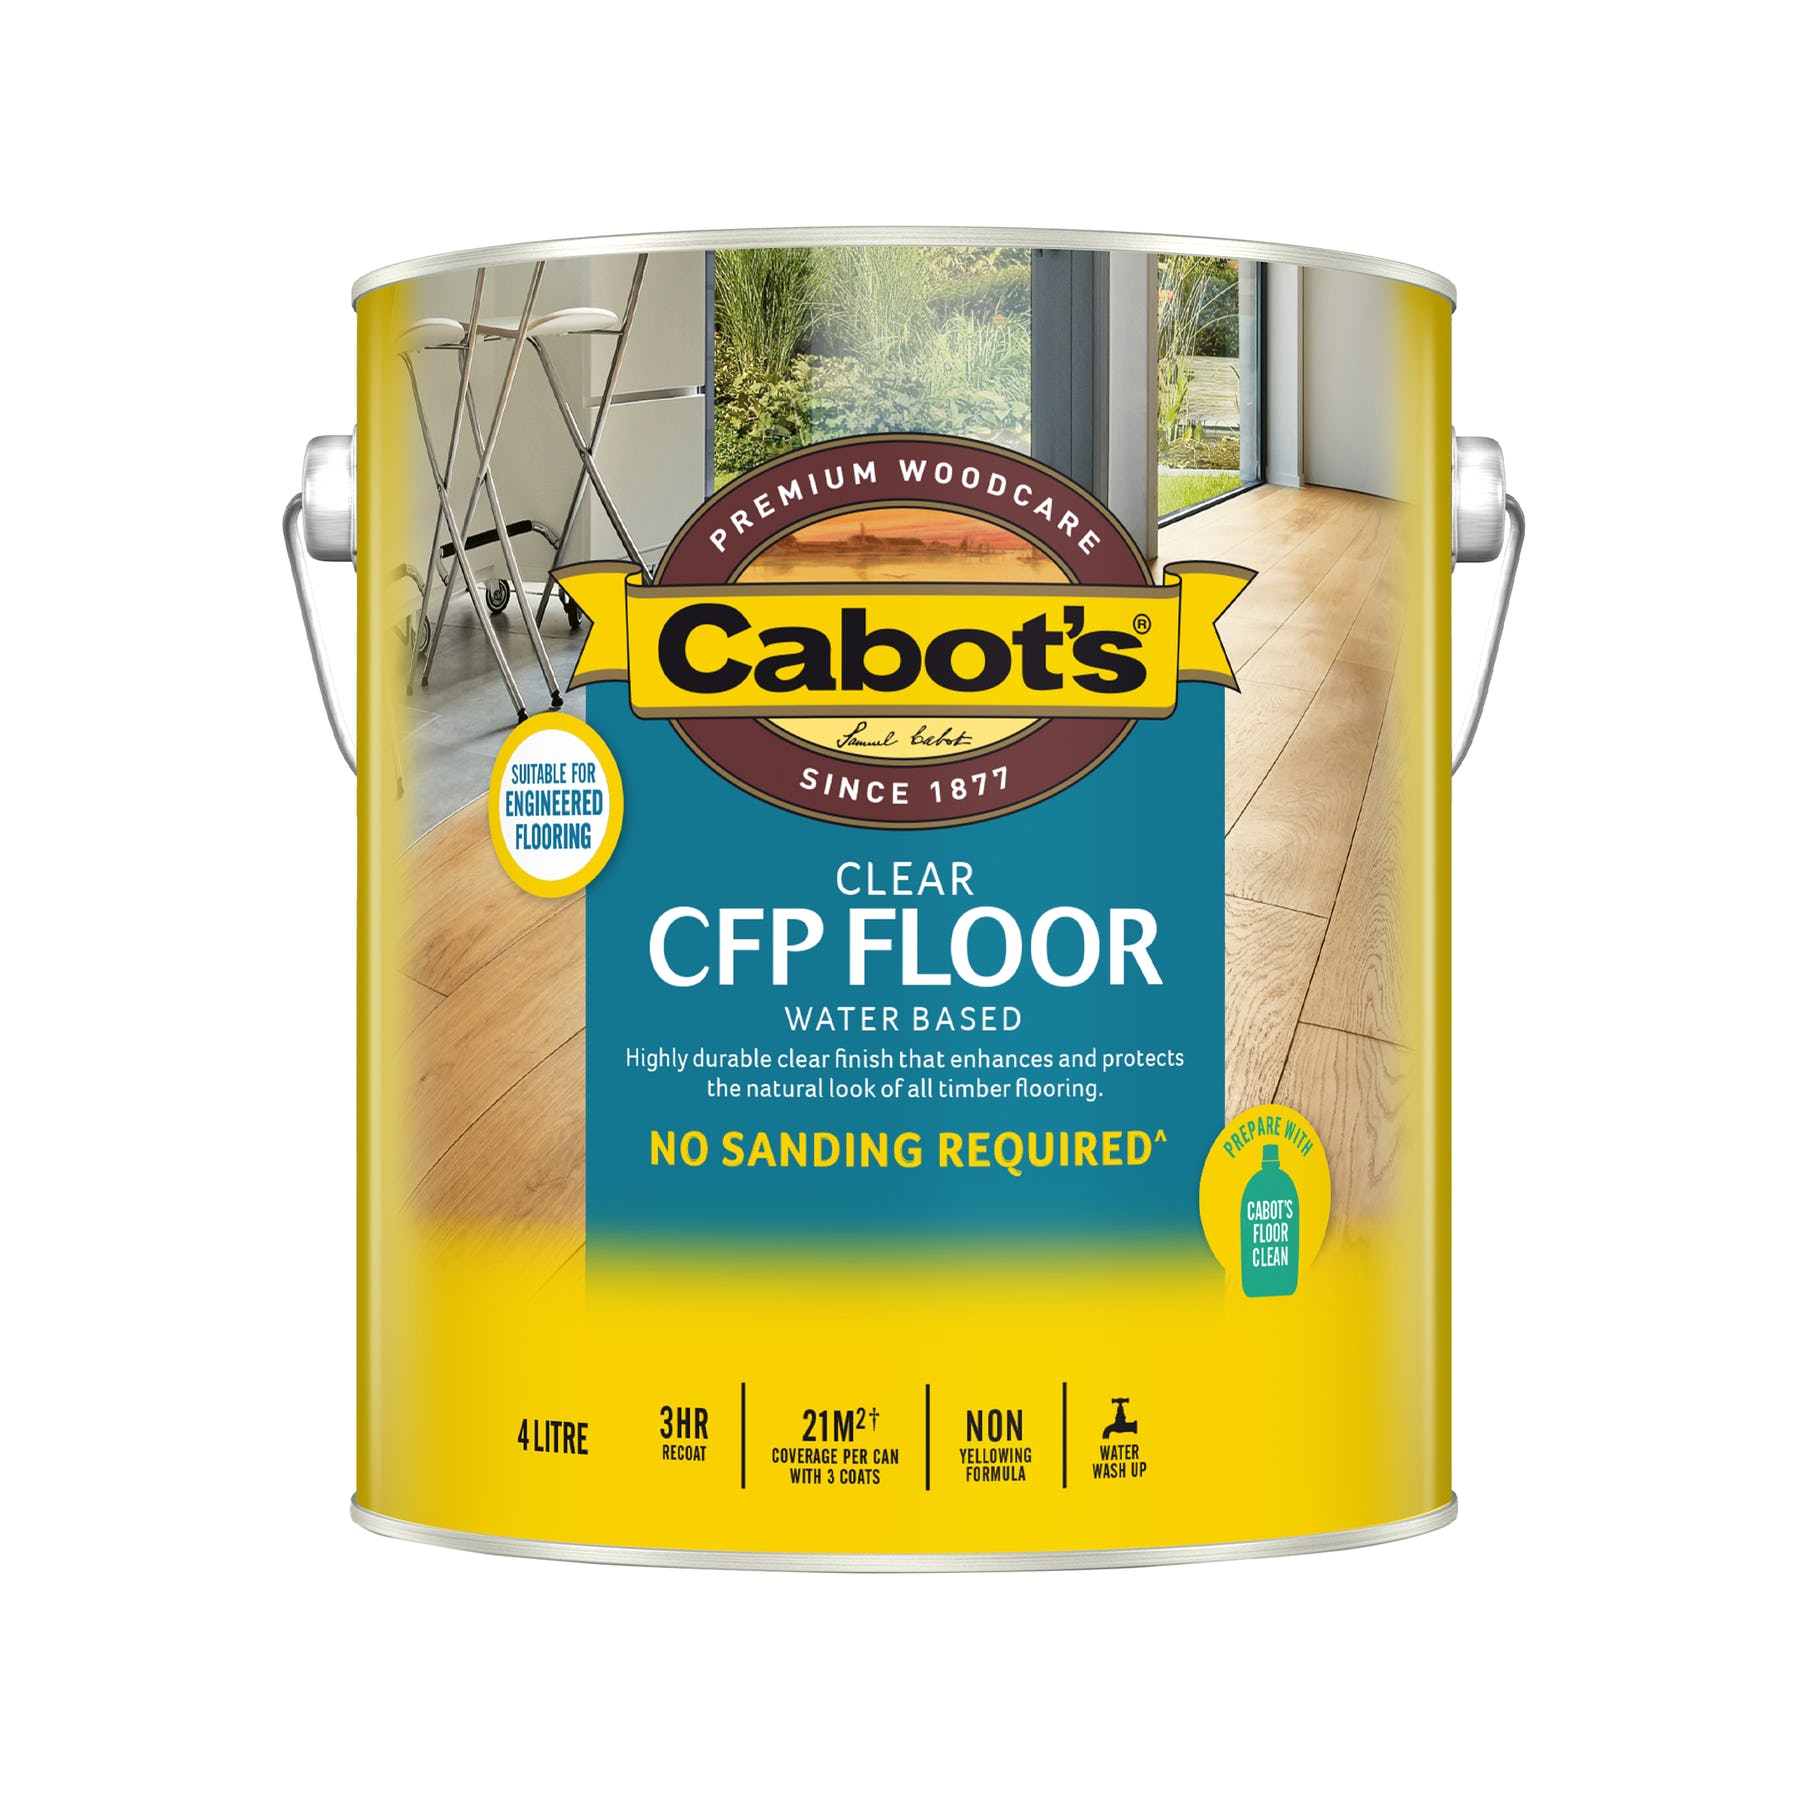 Cabot's CFP Floor Water Based